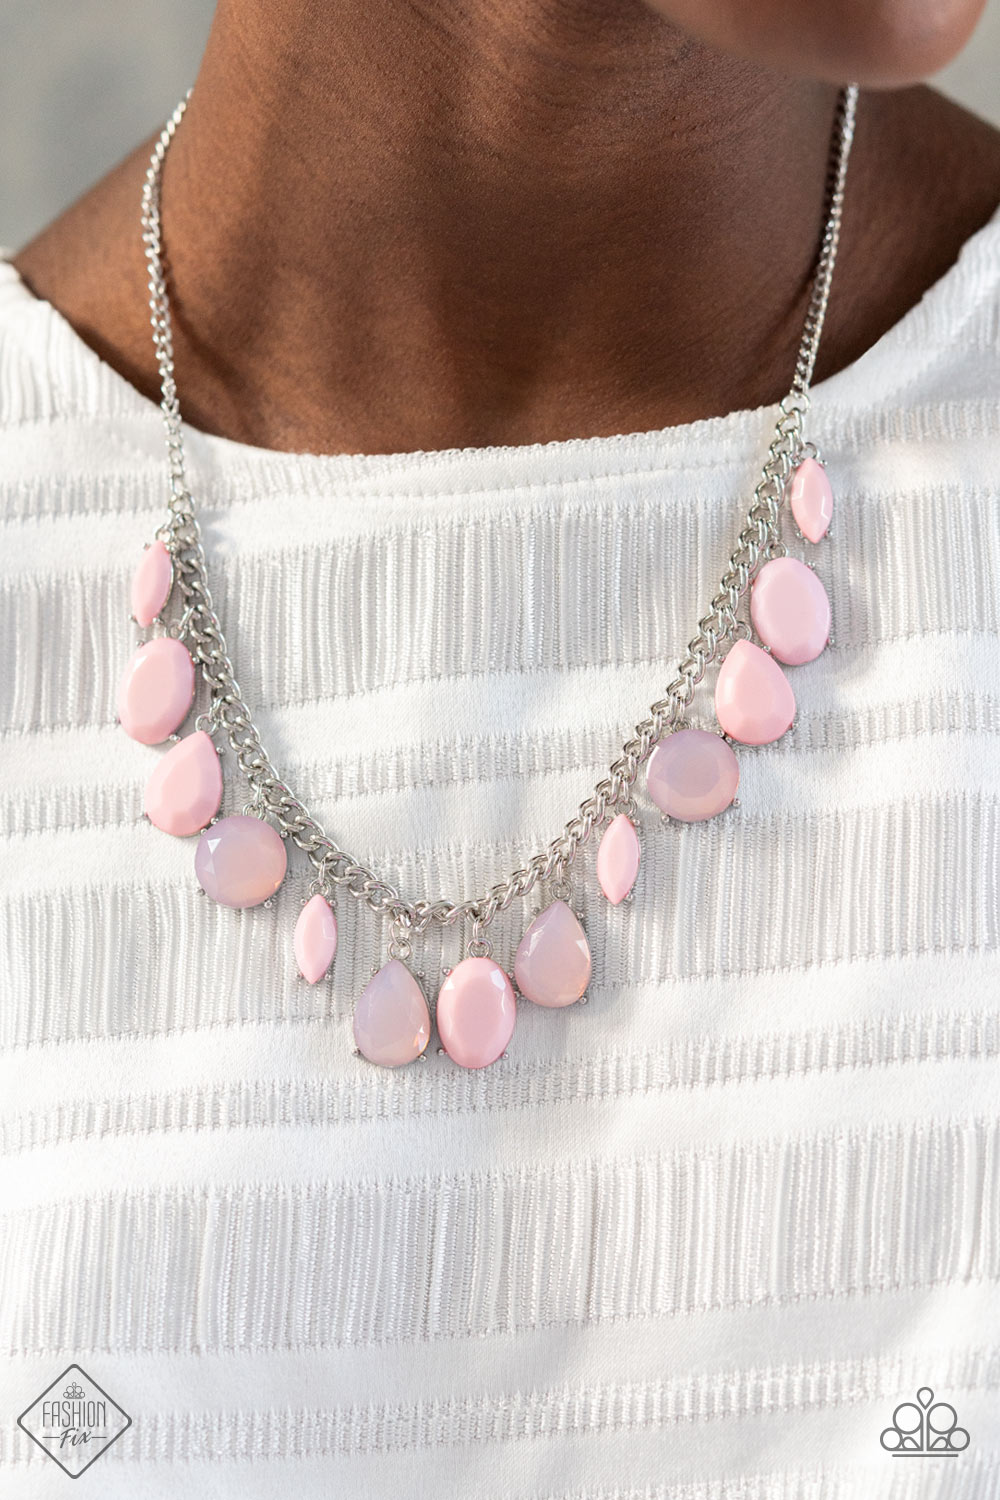 Fairytale Fortuity - Pink Necklace - Fashion Fix